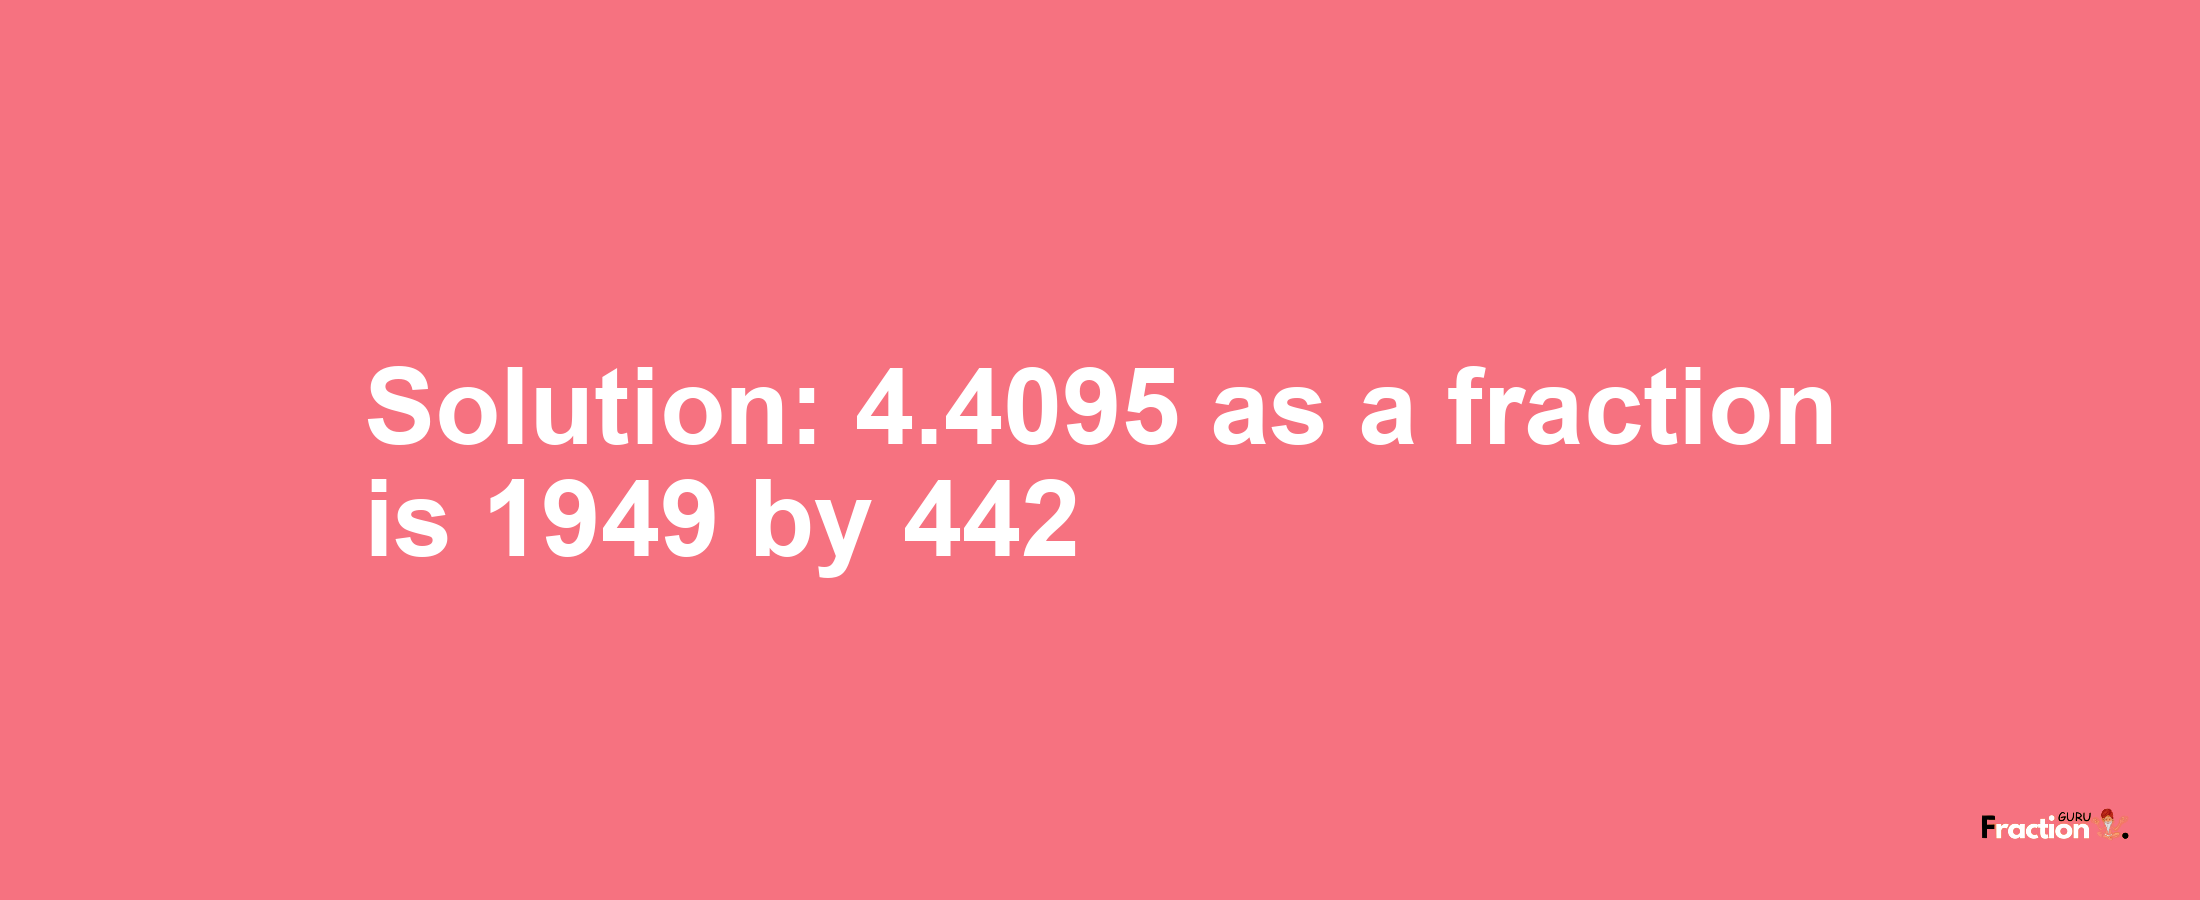 Solution:4.4095 as a fraction is 1949/442